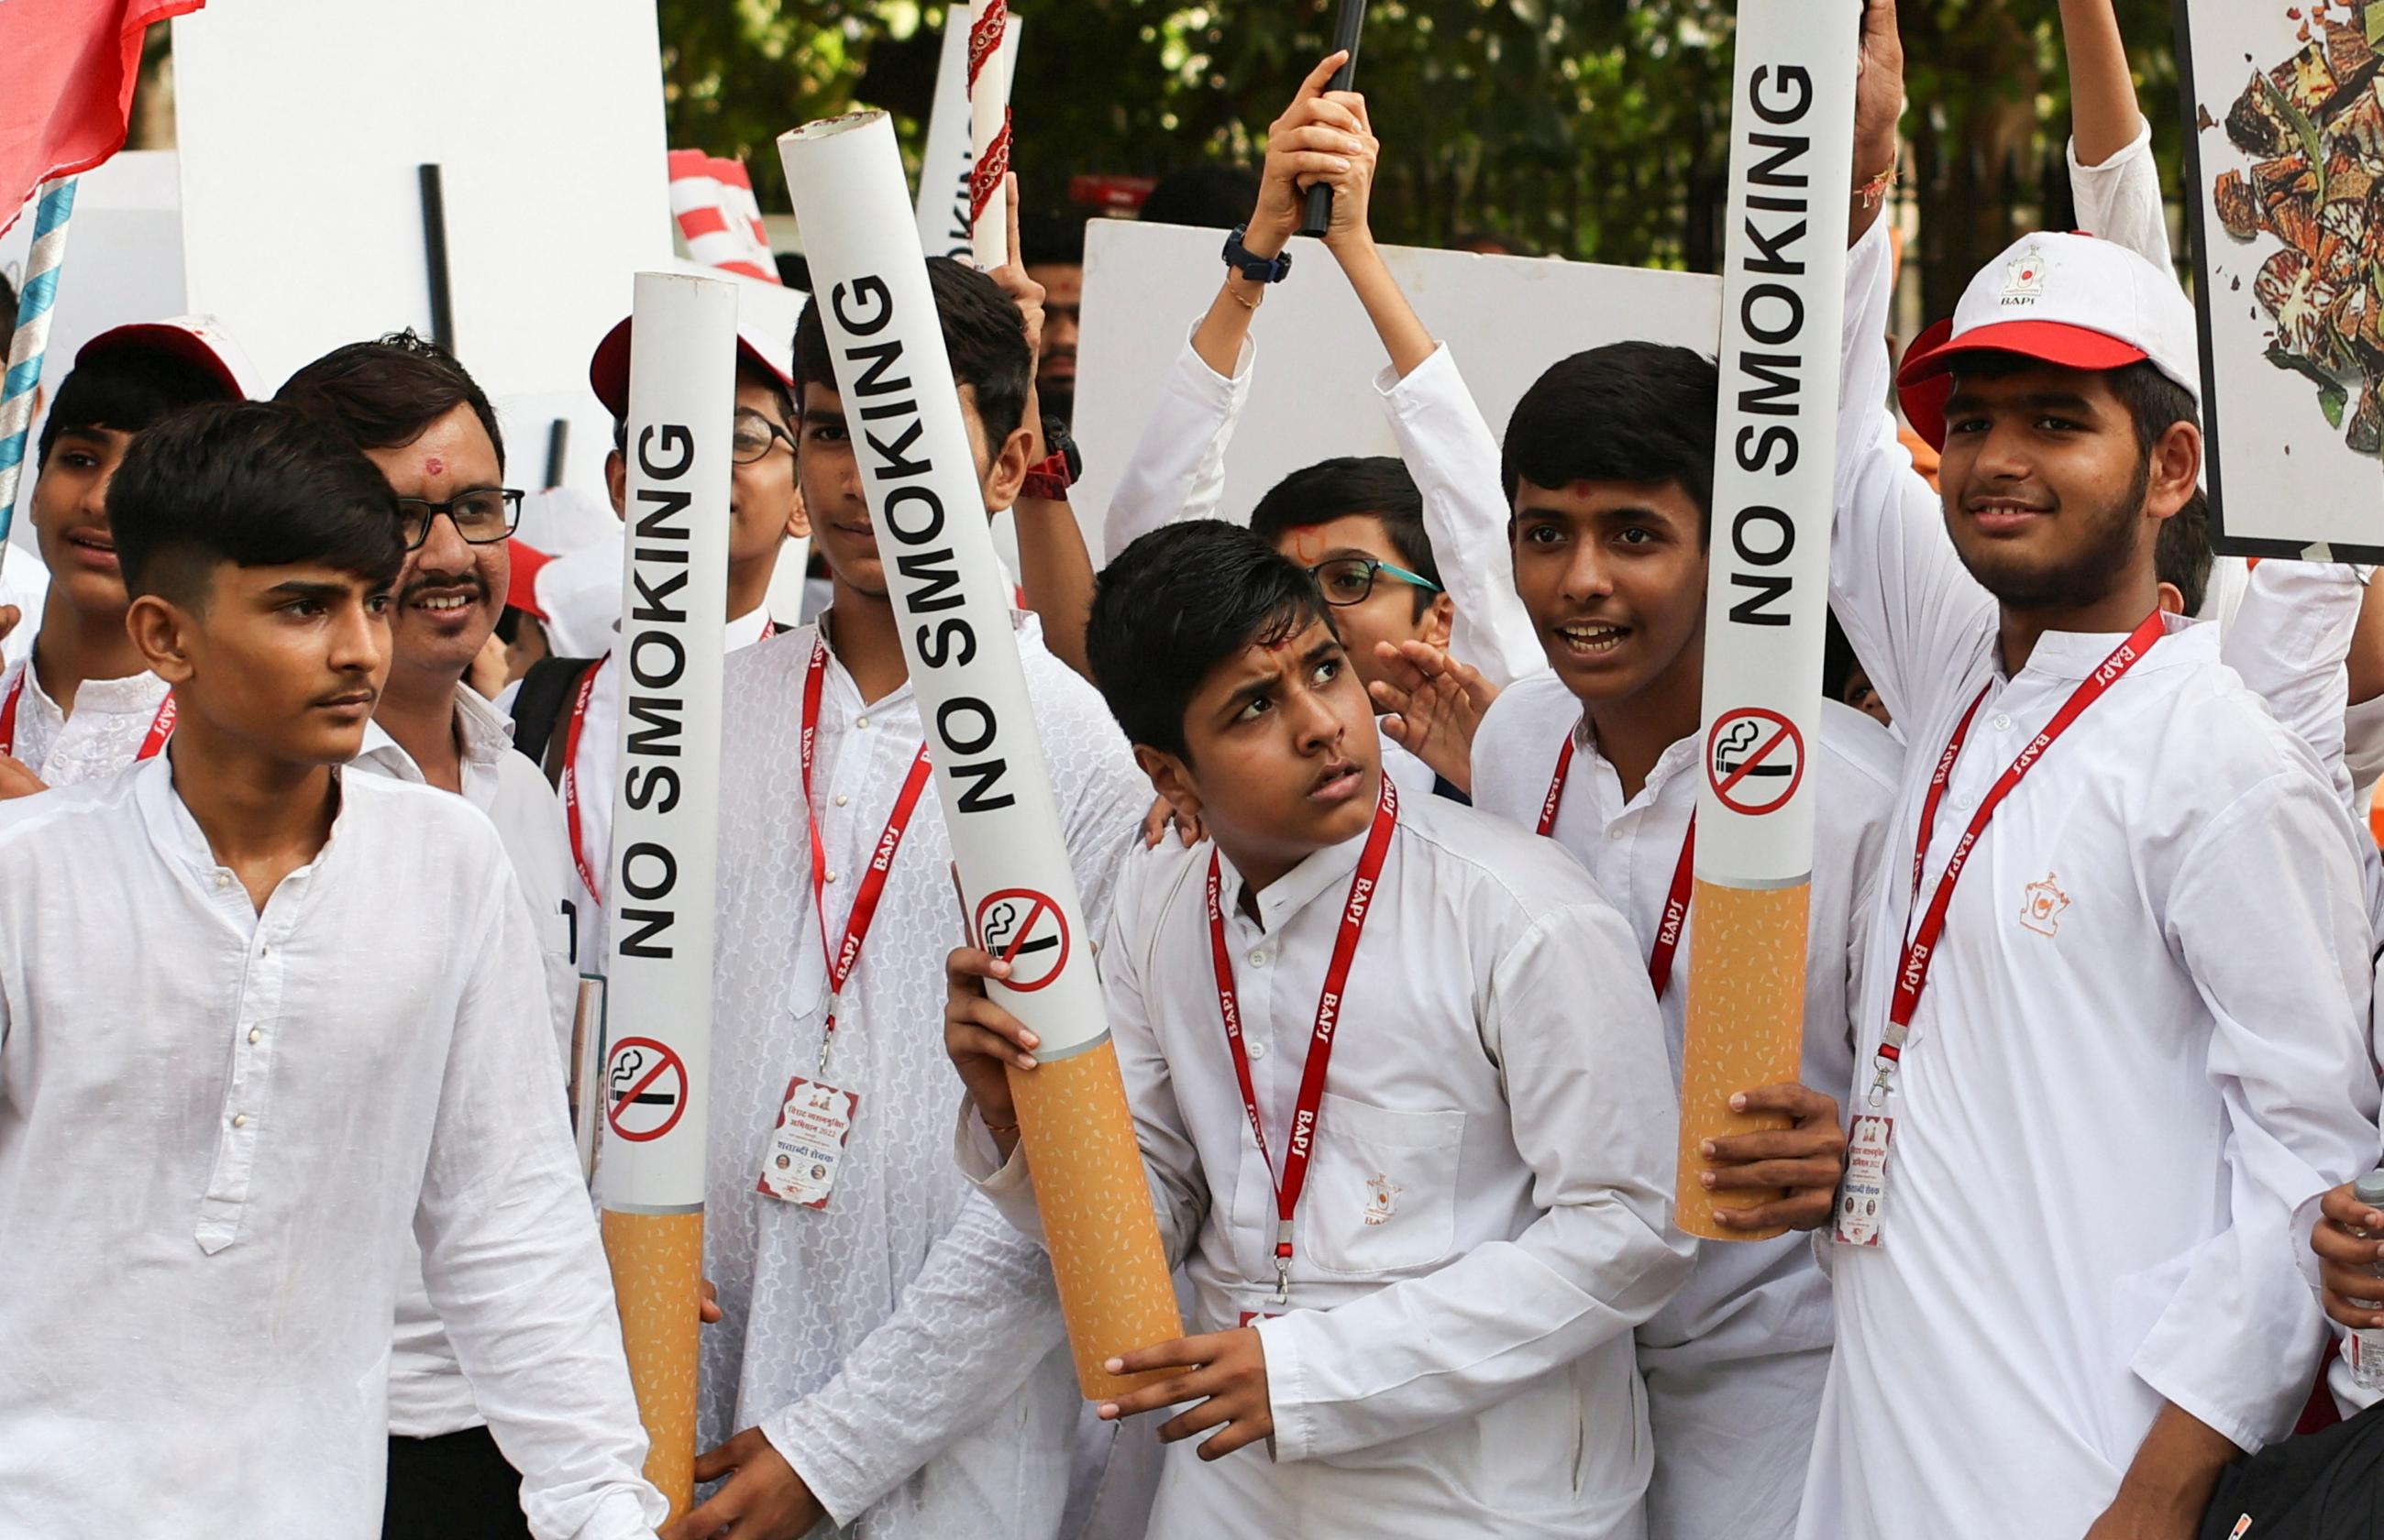 Students hold cigarette replicas to spread awareness on World No Tobacco Day in Mumbai, India, on May 31, 2022. REUTERS/Francis Mascarenhas